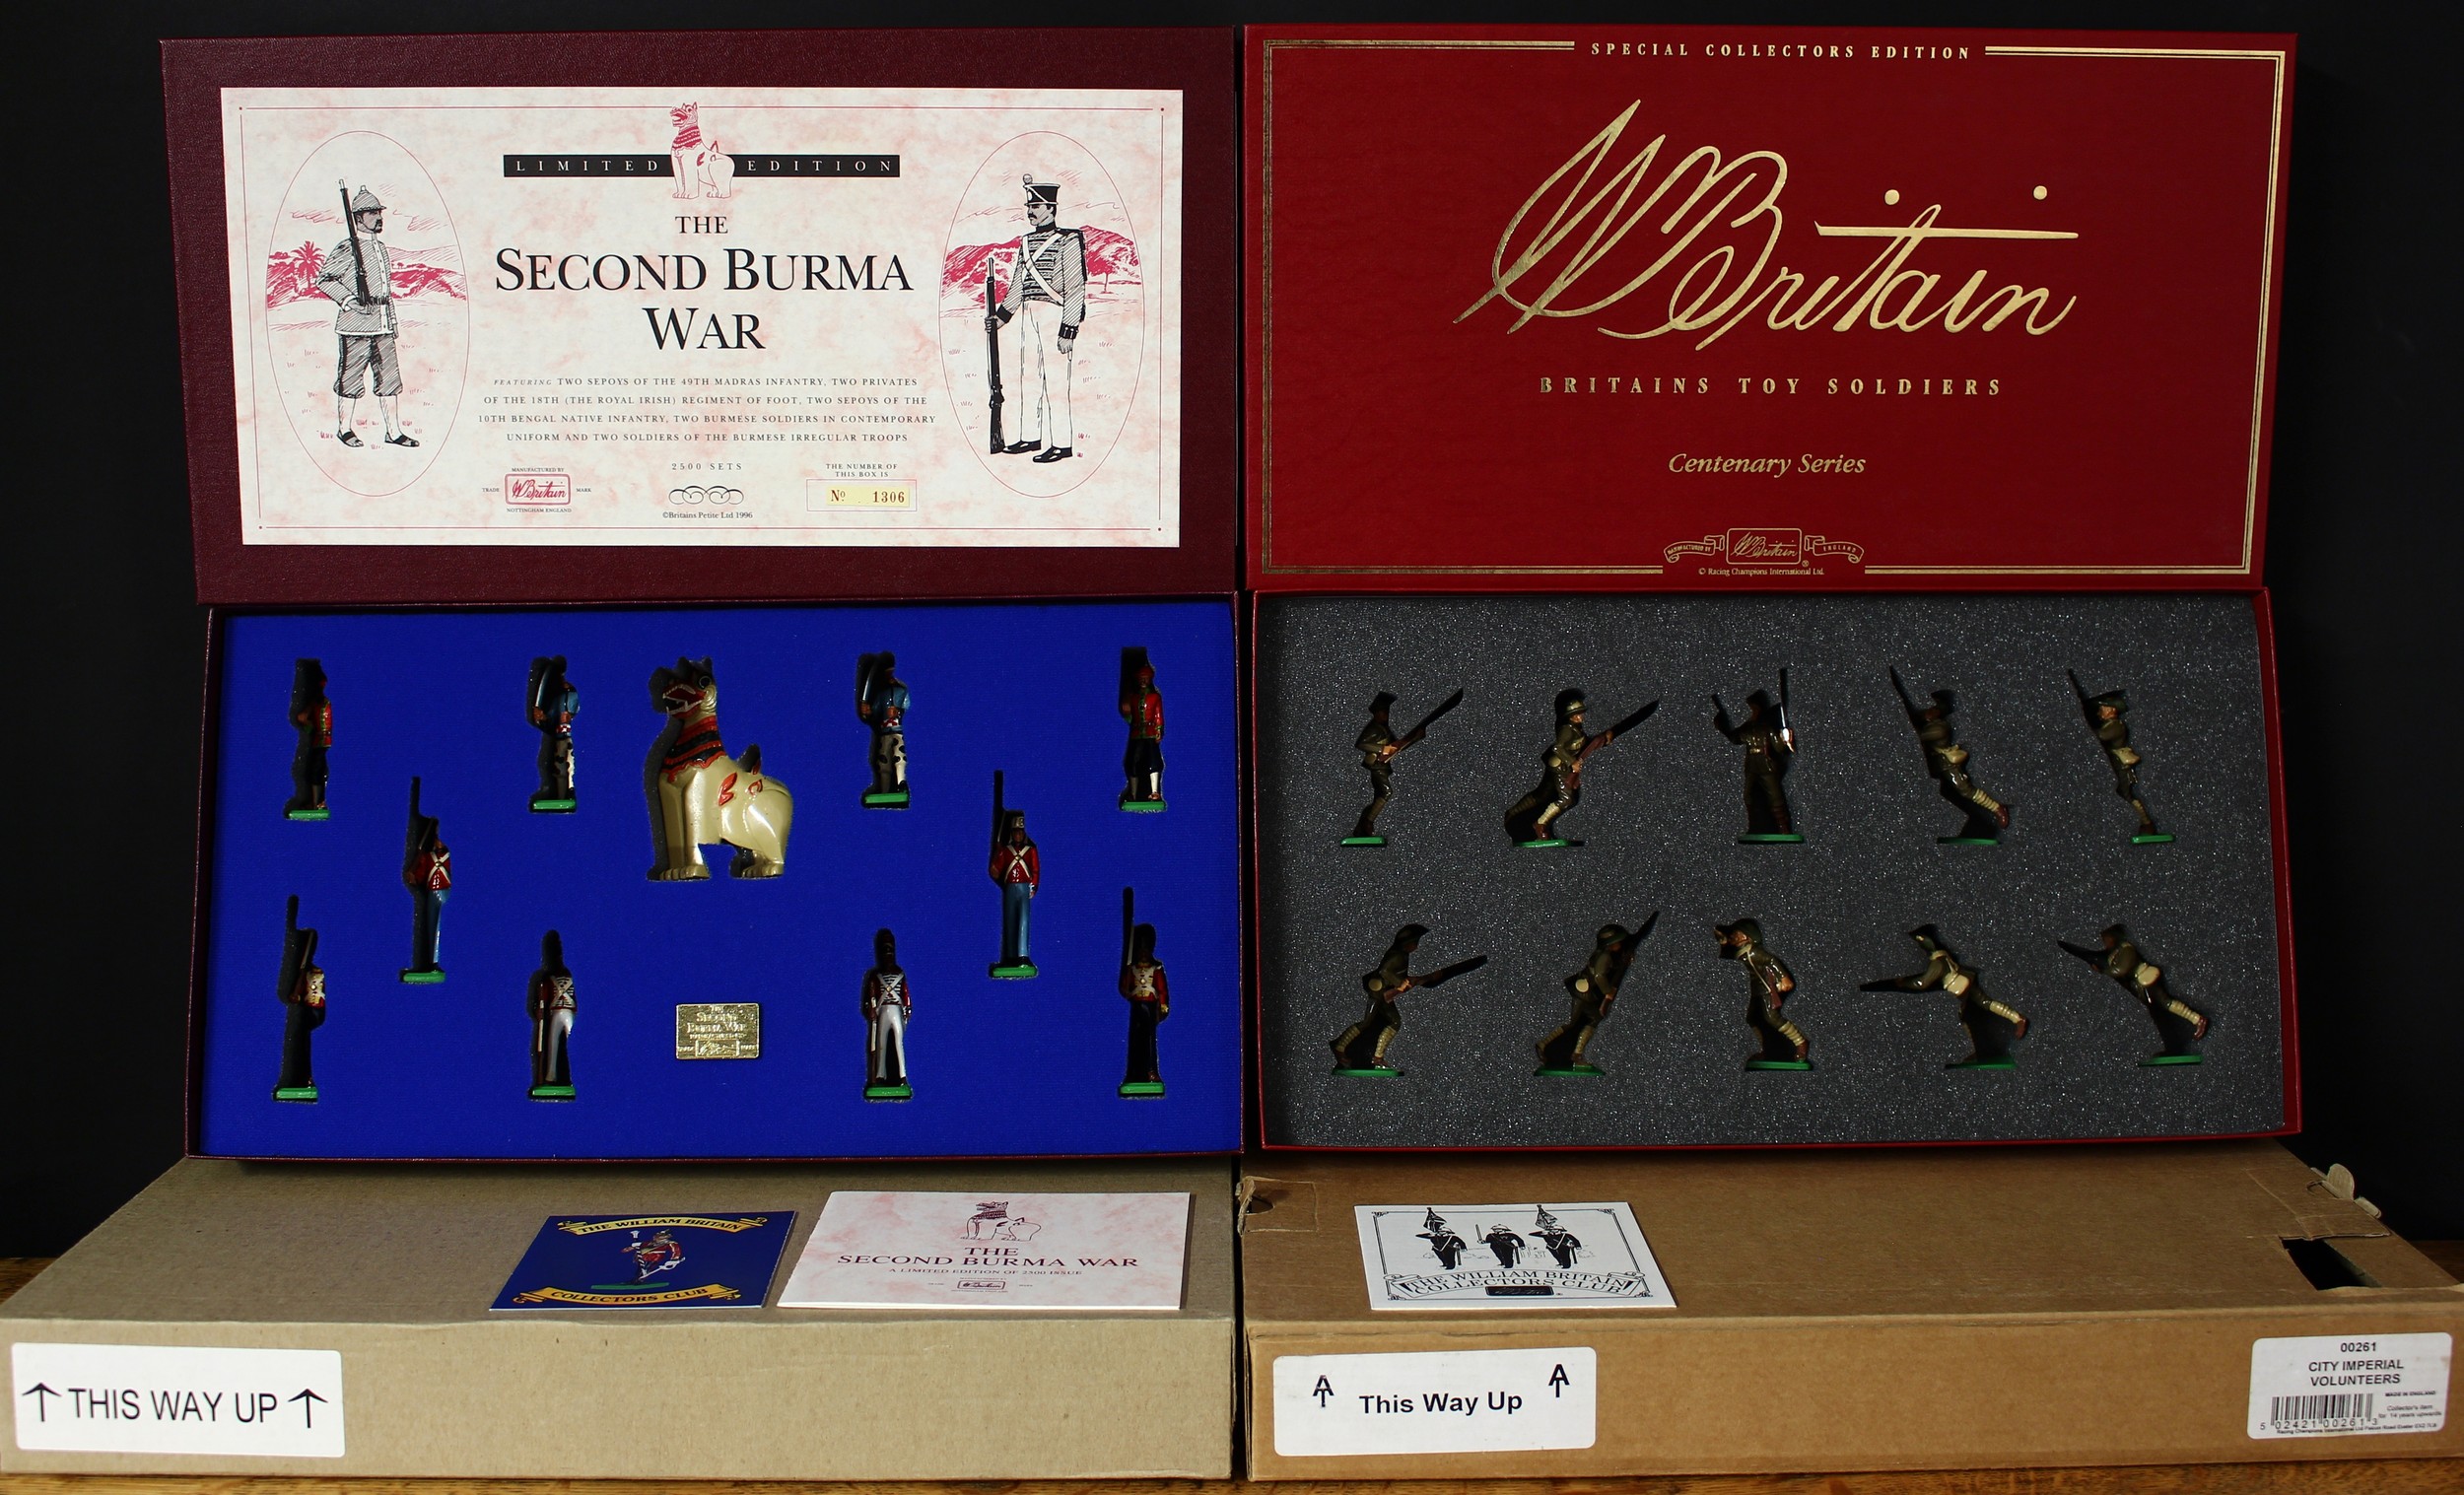 W Britain (Britains) 5296 The Second Burma War set, comprising two Sepoys of the 49th Madras